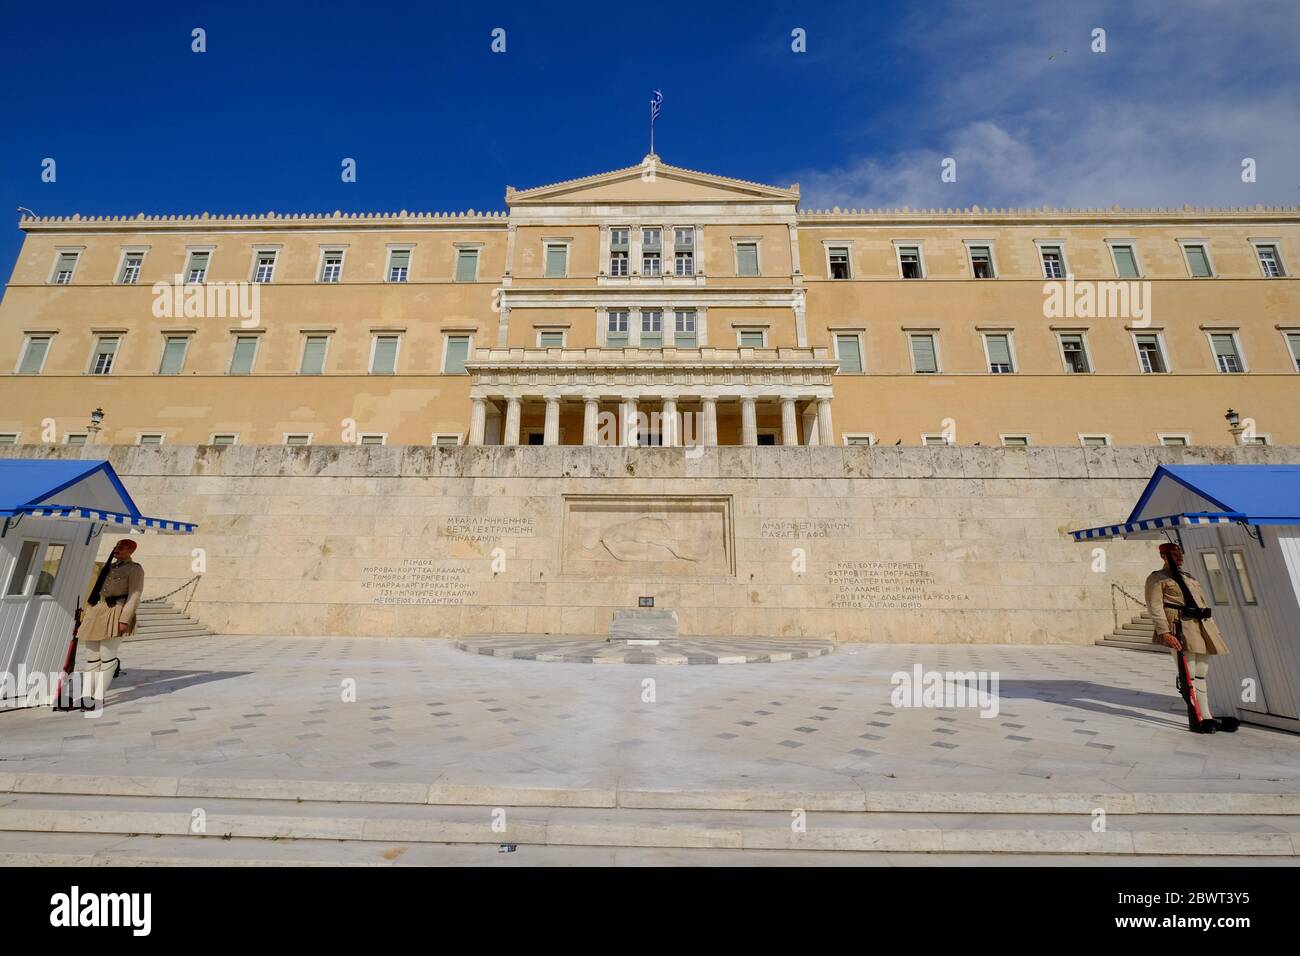 Old Royal Palace, house of Hellenic Parliament, Syntagma Square, Athens, Greece, Europe Stock Photo